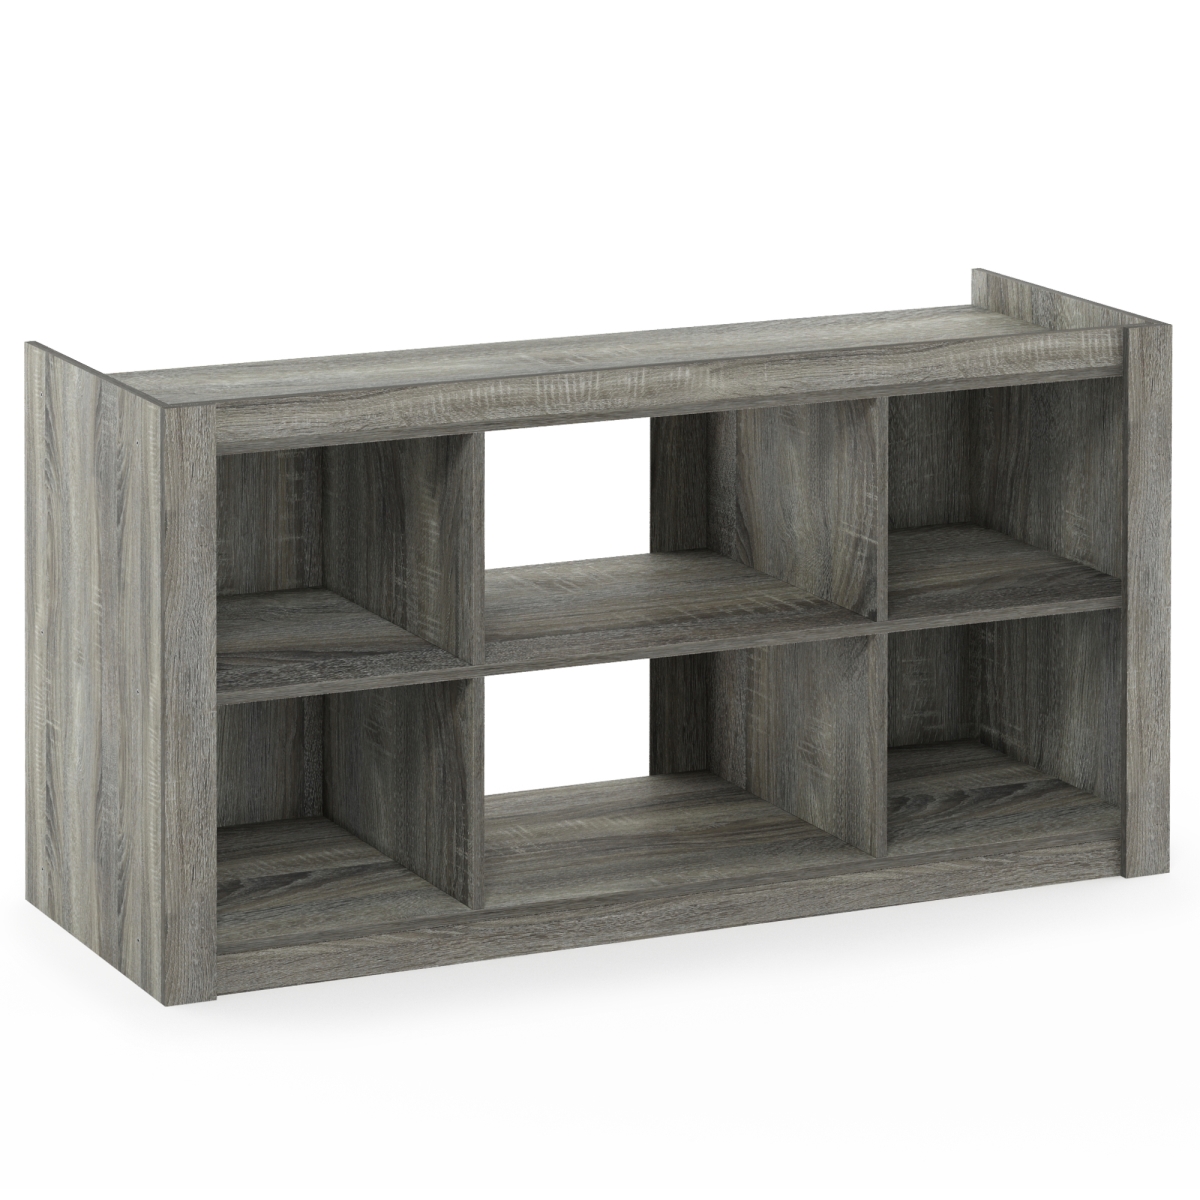 Picture of Furinno 18147GYW Fowler Multipurpose TV Stand Bookshelves, French Oak Grey - 23.16 x 43.9 x 16 in.